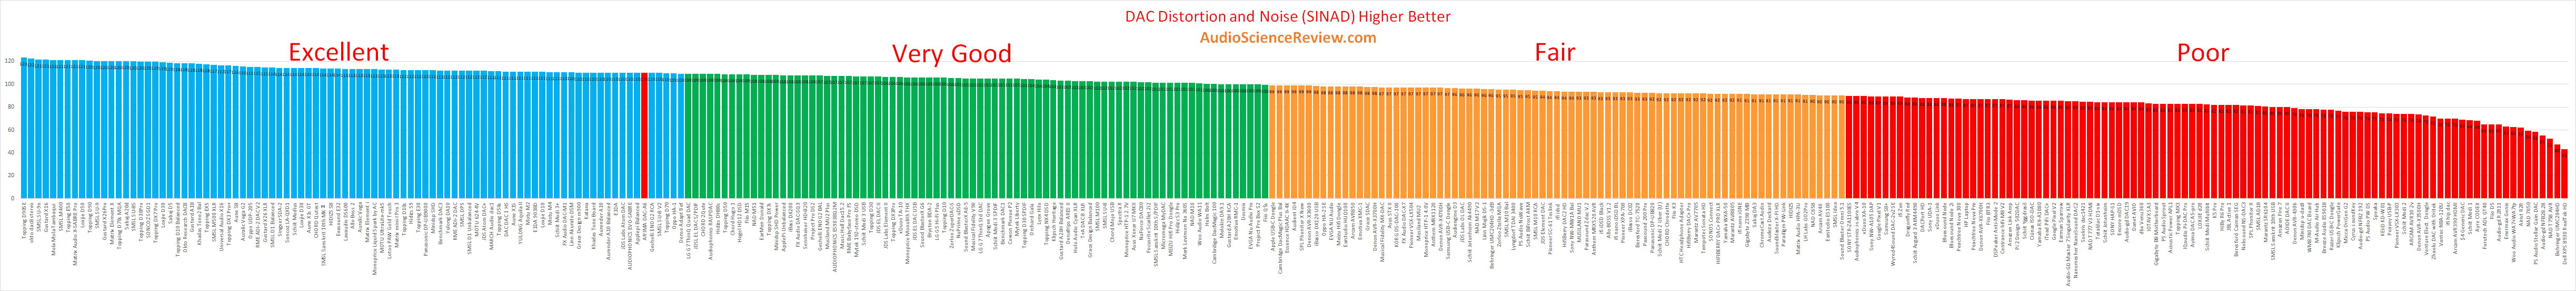 Best stereo dac reviewed 2021.png